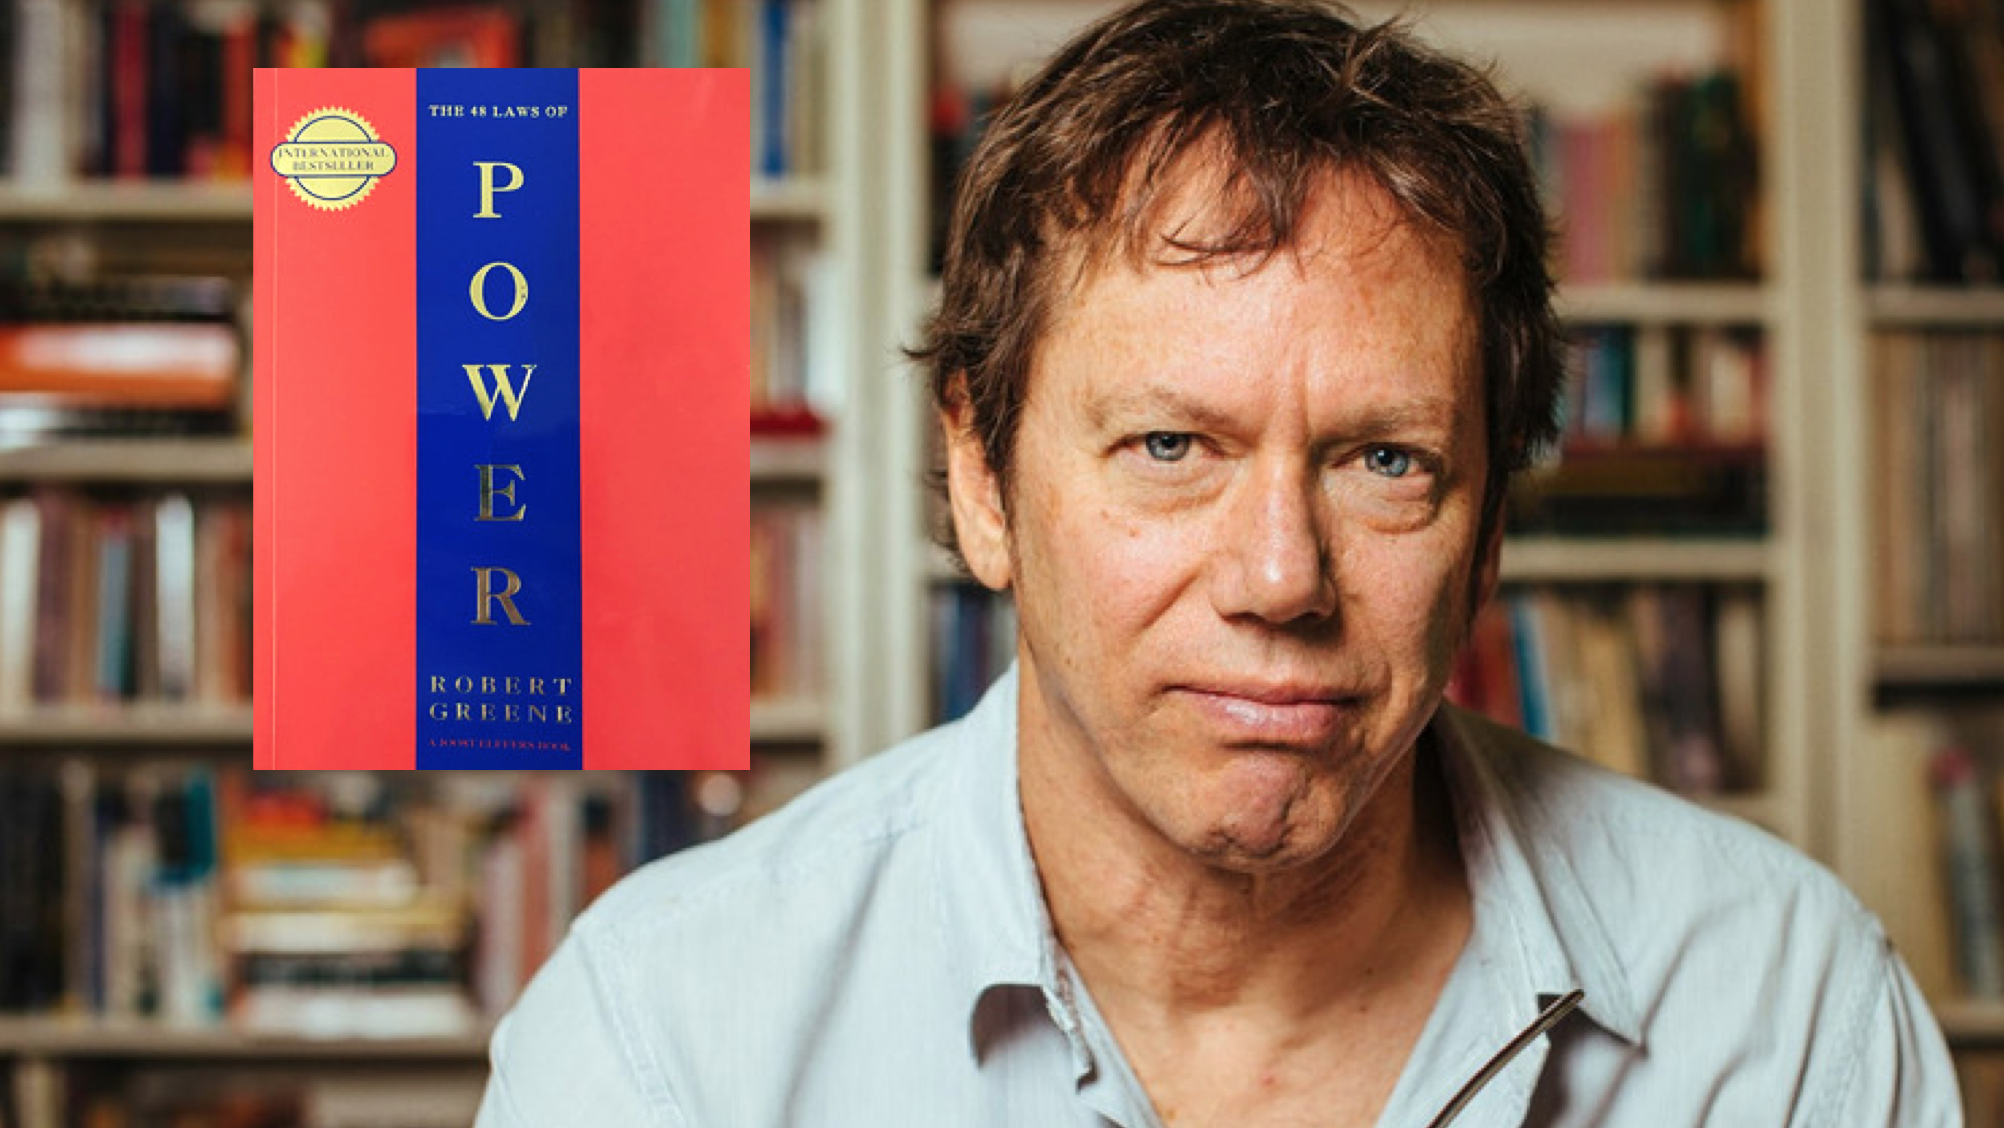 the-48-laws-of-power-by-robert-greene-review-upminded